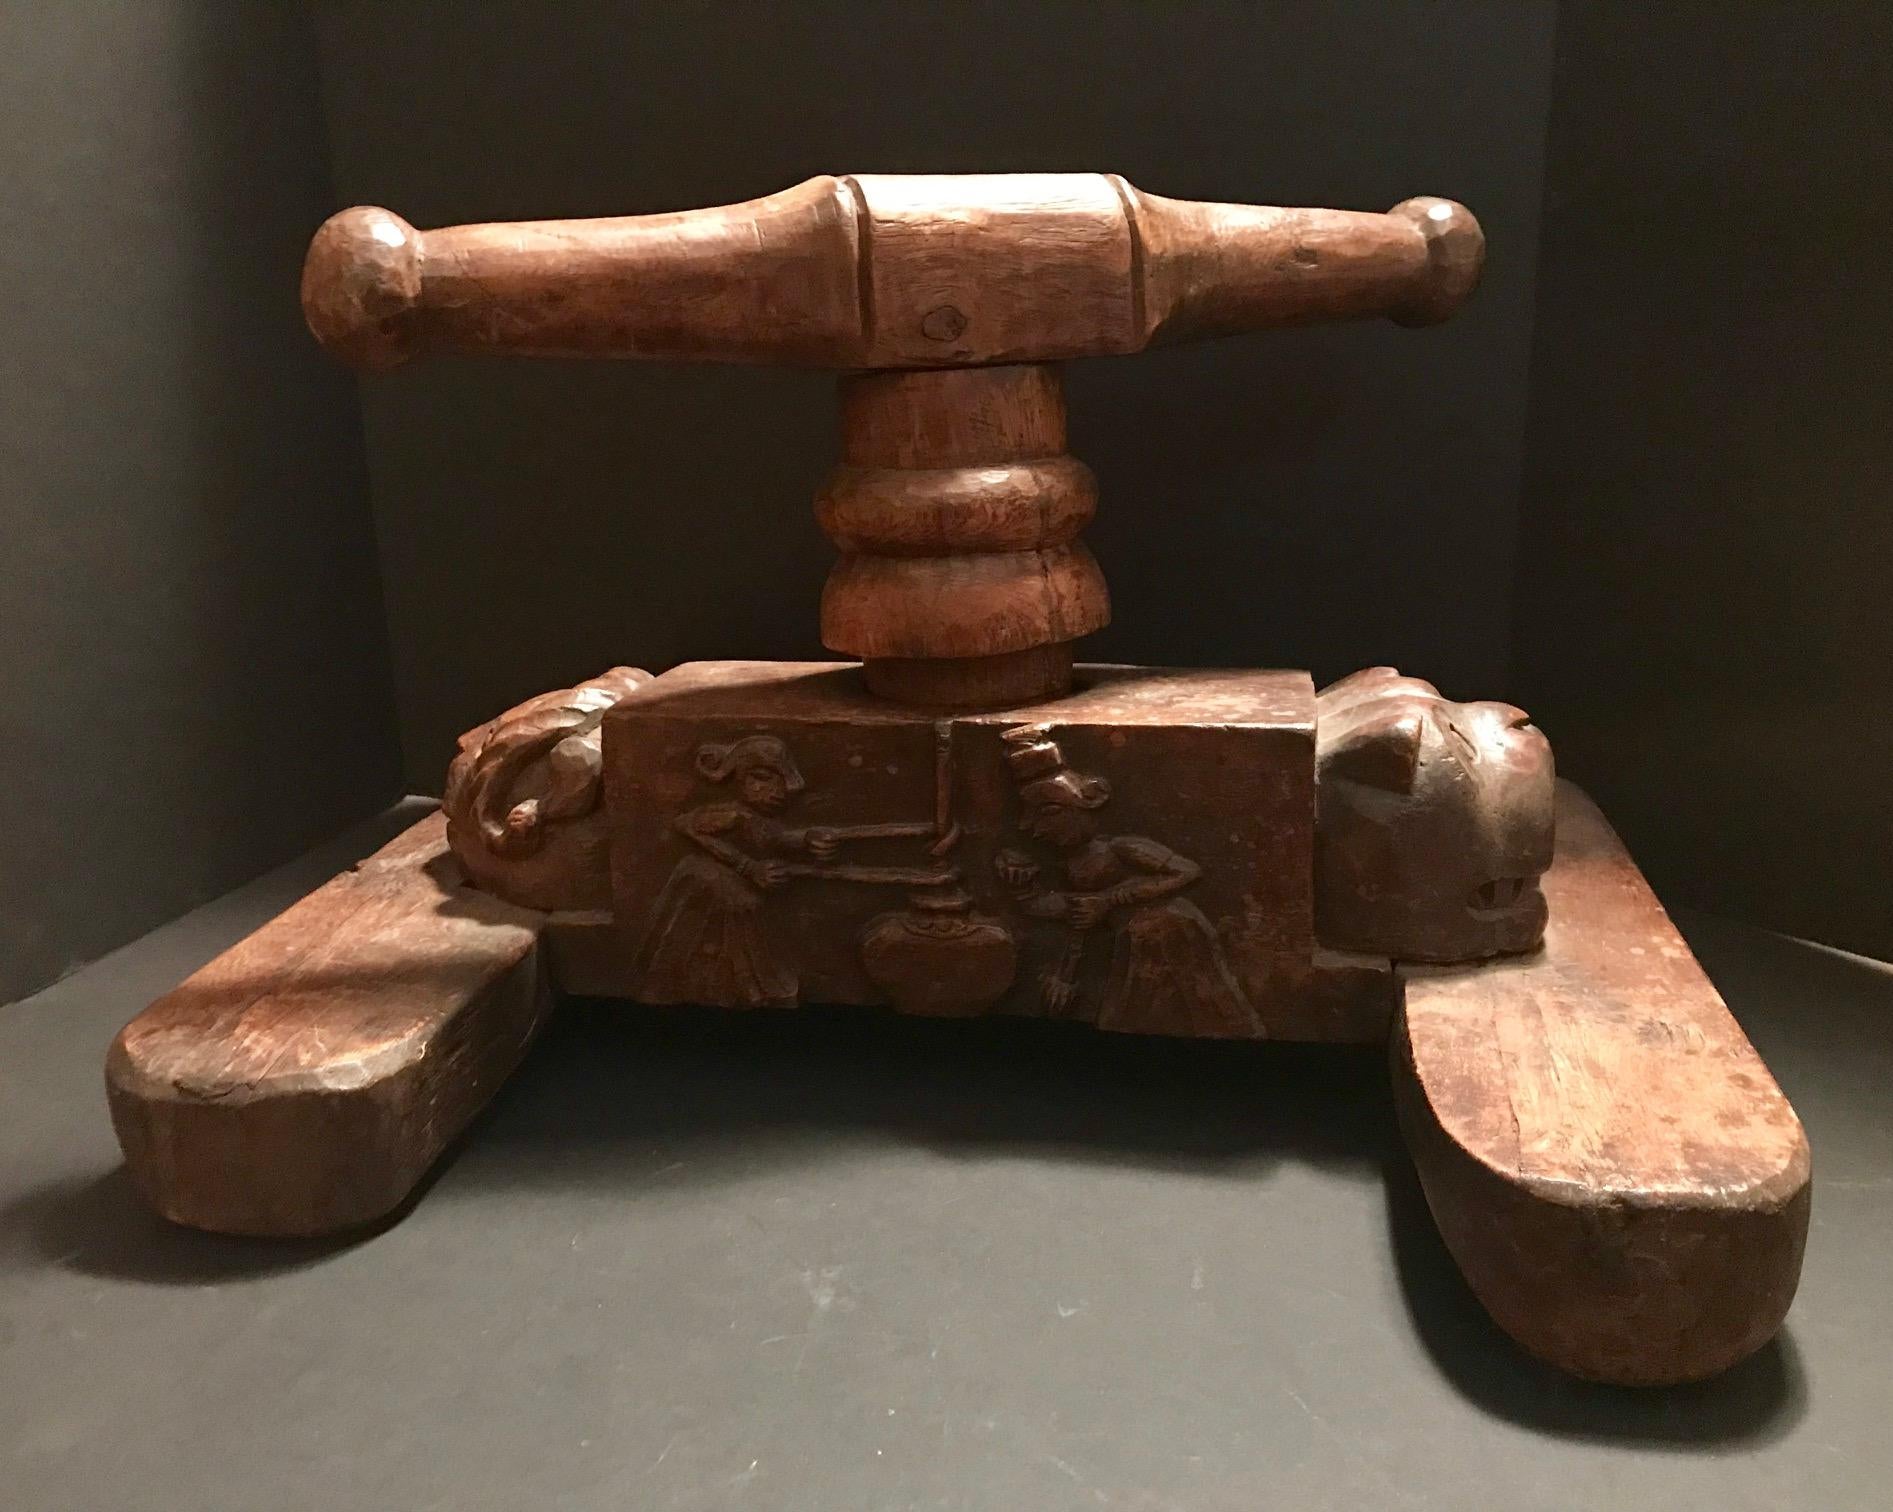 Antique goat cheese press, large Pennsylvania Dutch hand-carved wood Primitive, Folk Art, circa 1800

This rare goat cheese press is American Folk Art. It is created by a peasant craftsman with intricacy. The bas relief carving on the front shows